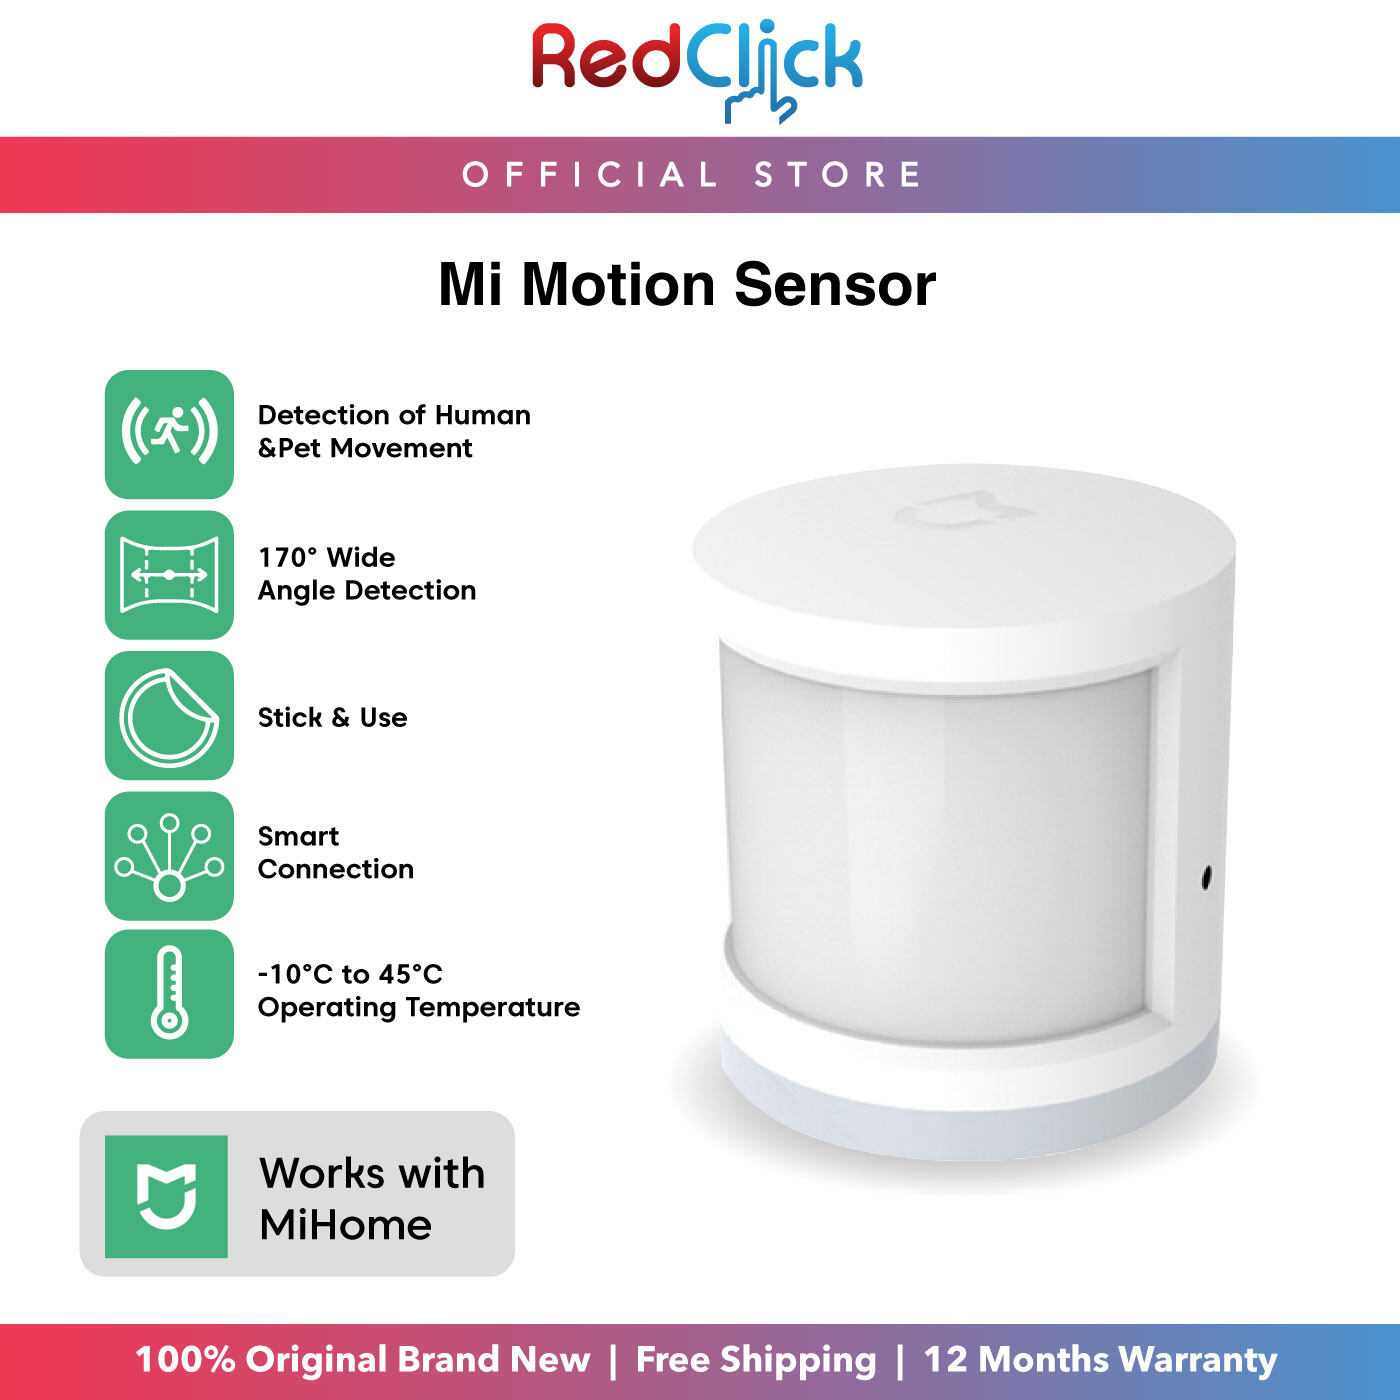 Xiaomi Mi Motion Sensor Human Detection and Pet Movement Wide Angle Detection Smart Connection Works with MiHome